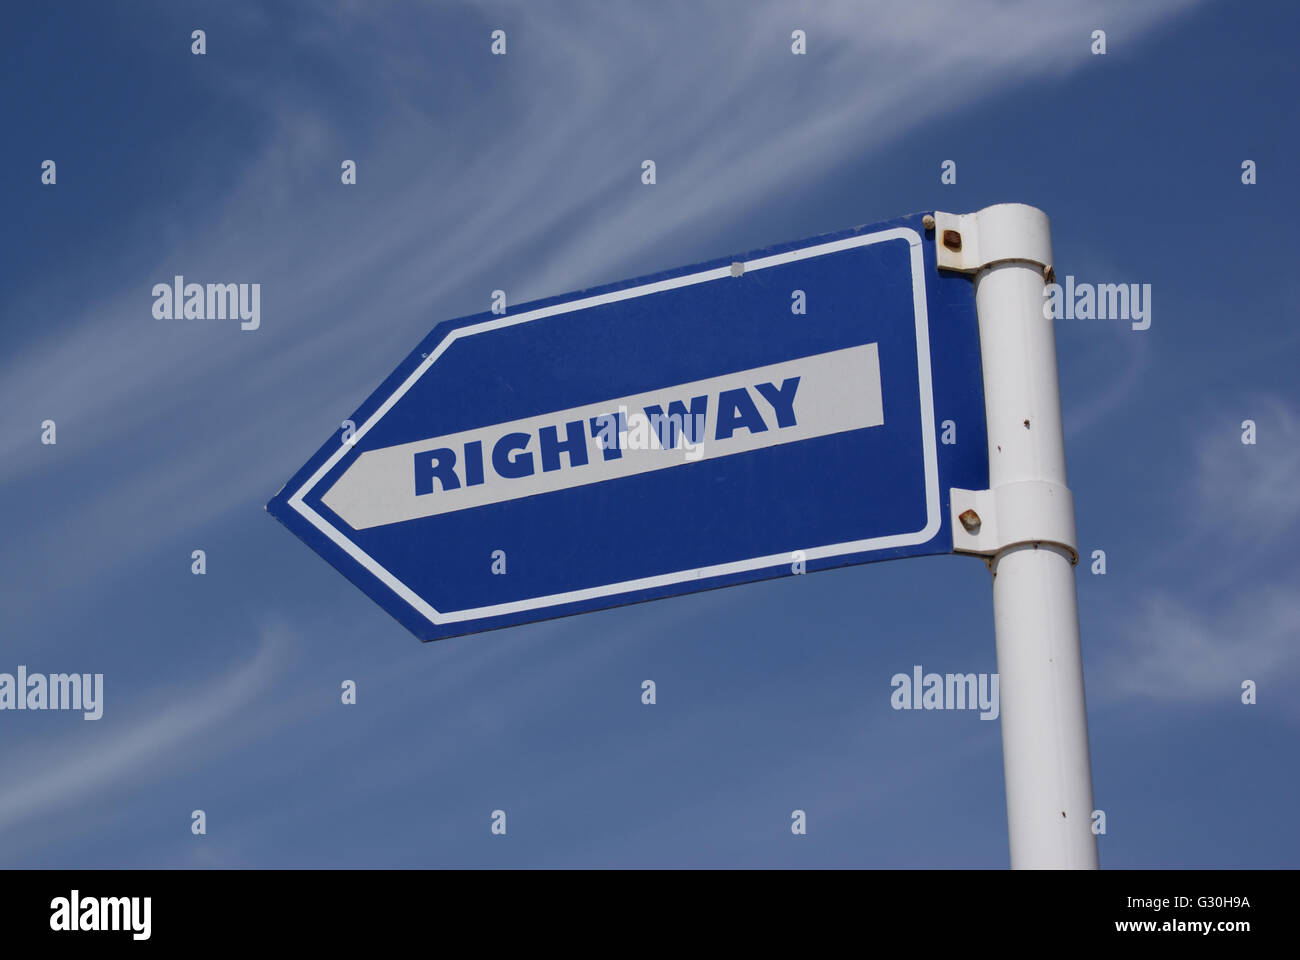 Road sign and words in concept Stock Photo